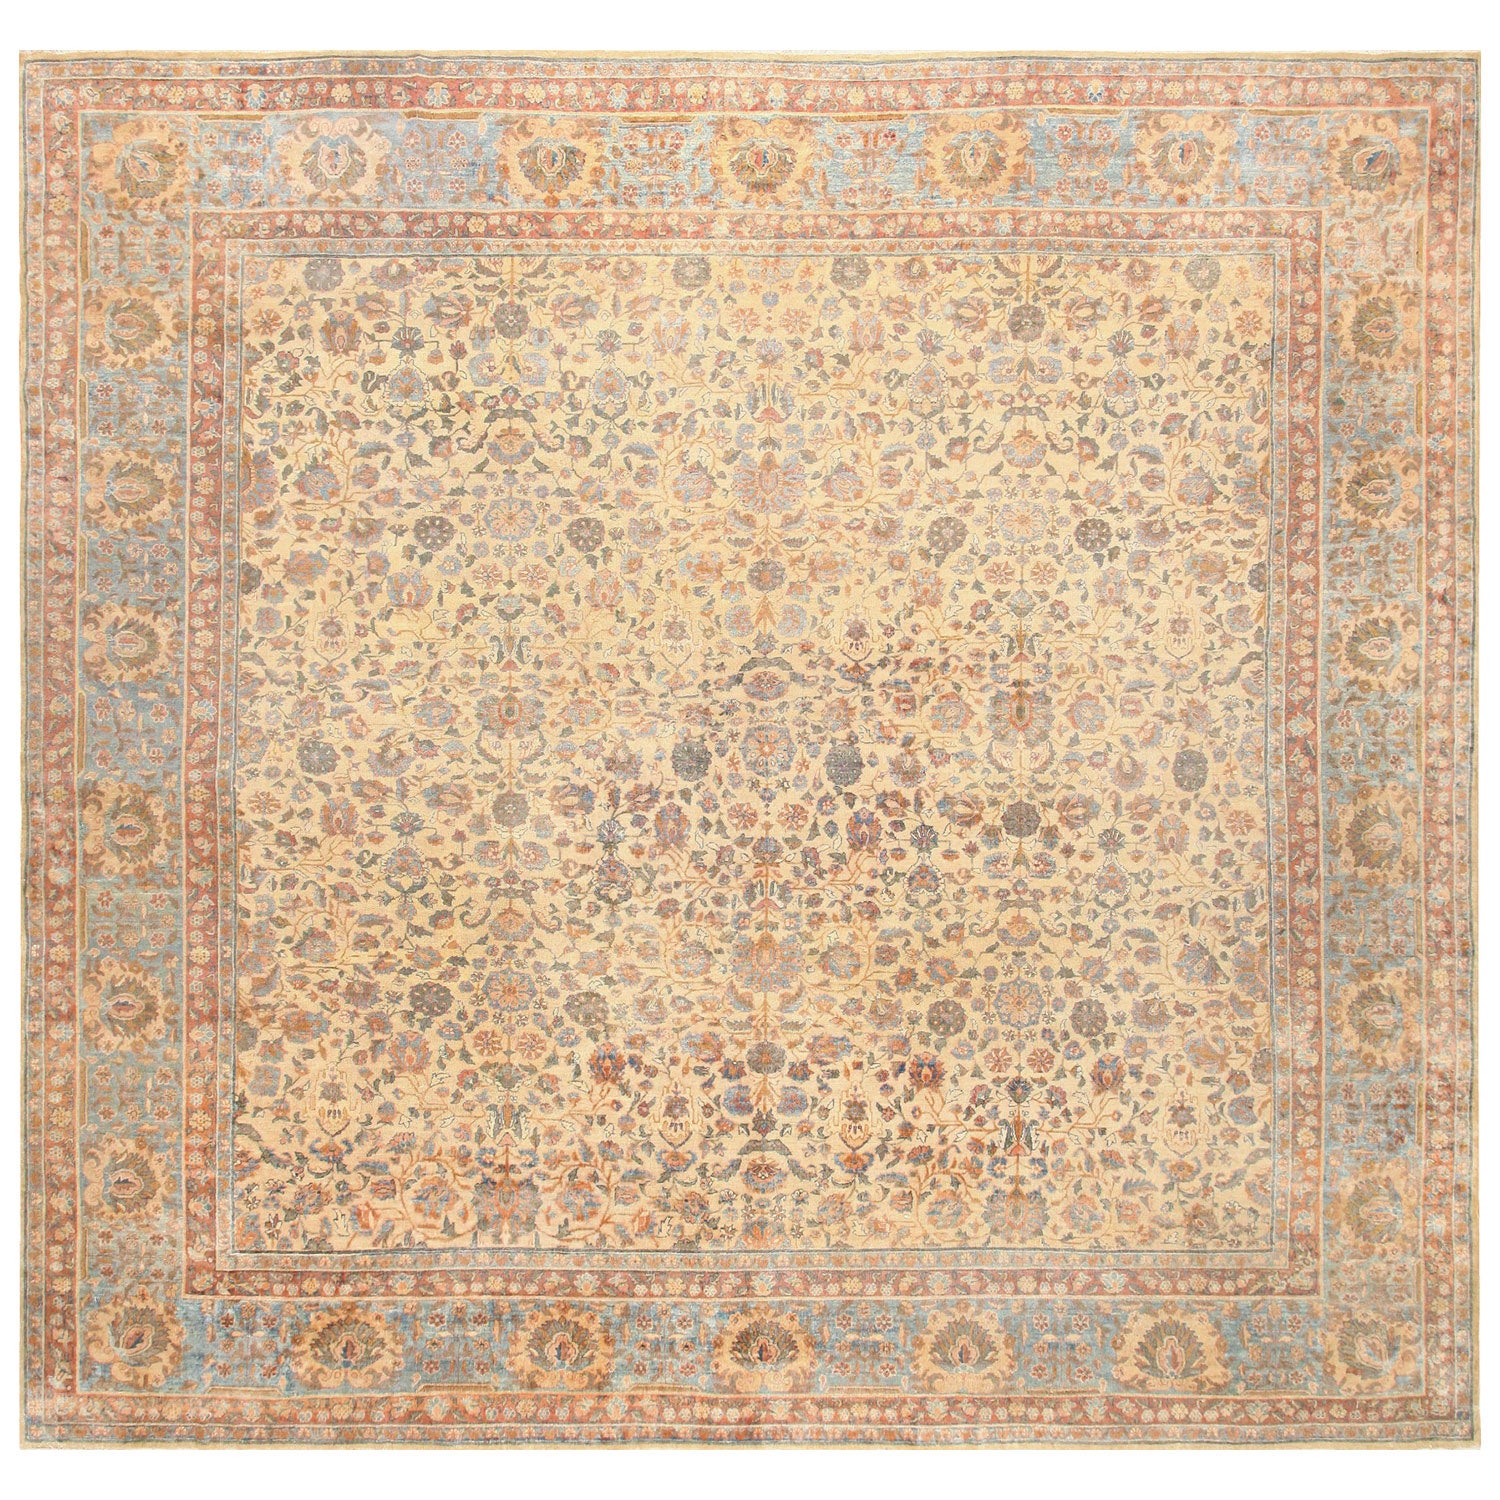 Exquisite handwoven Persian/Oriental carpet with intricate floral and geometric motifs.